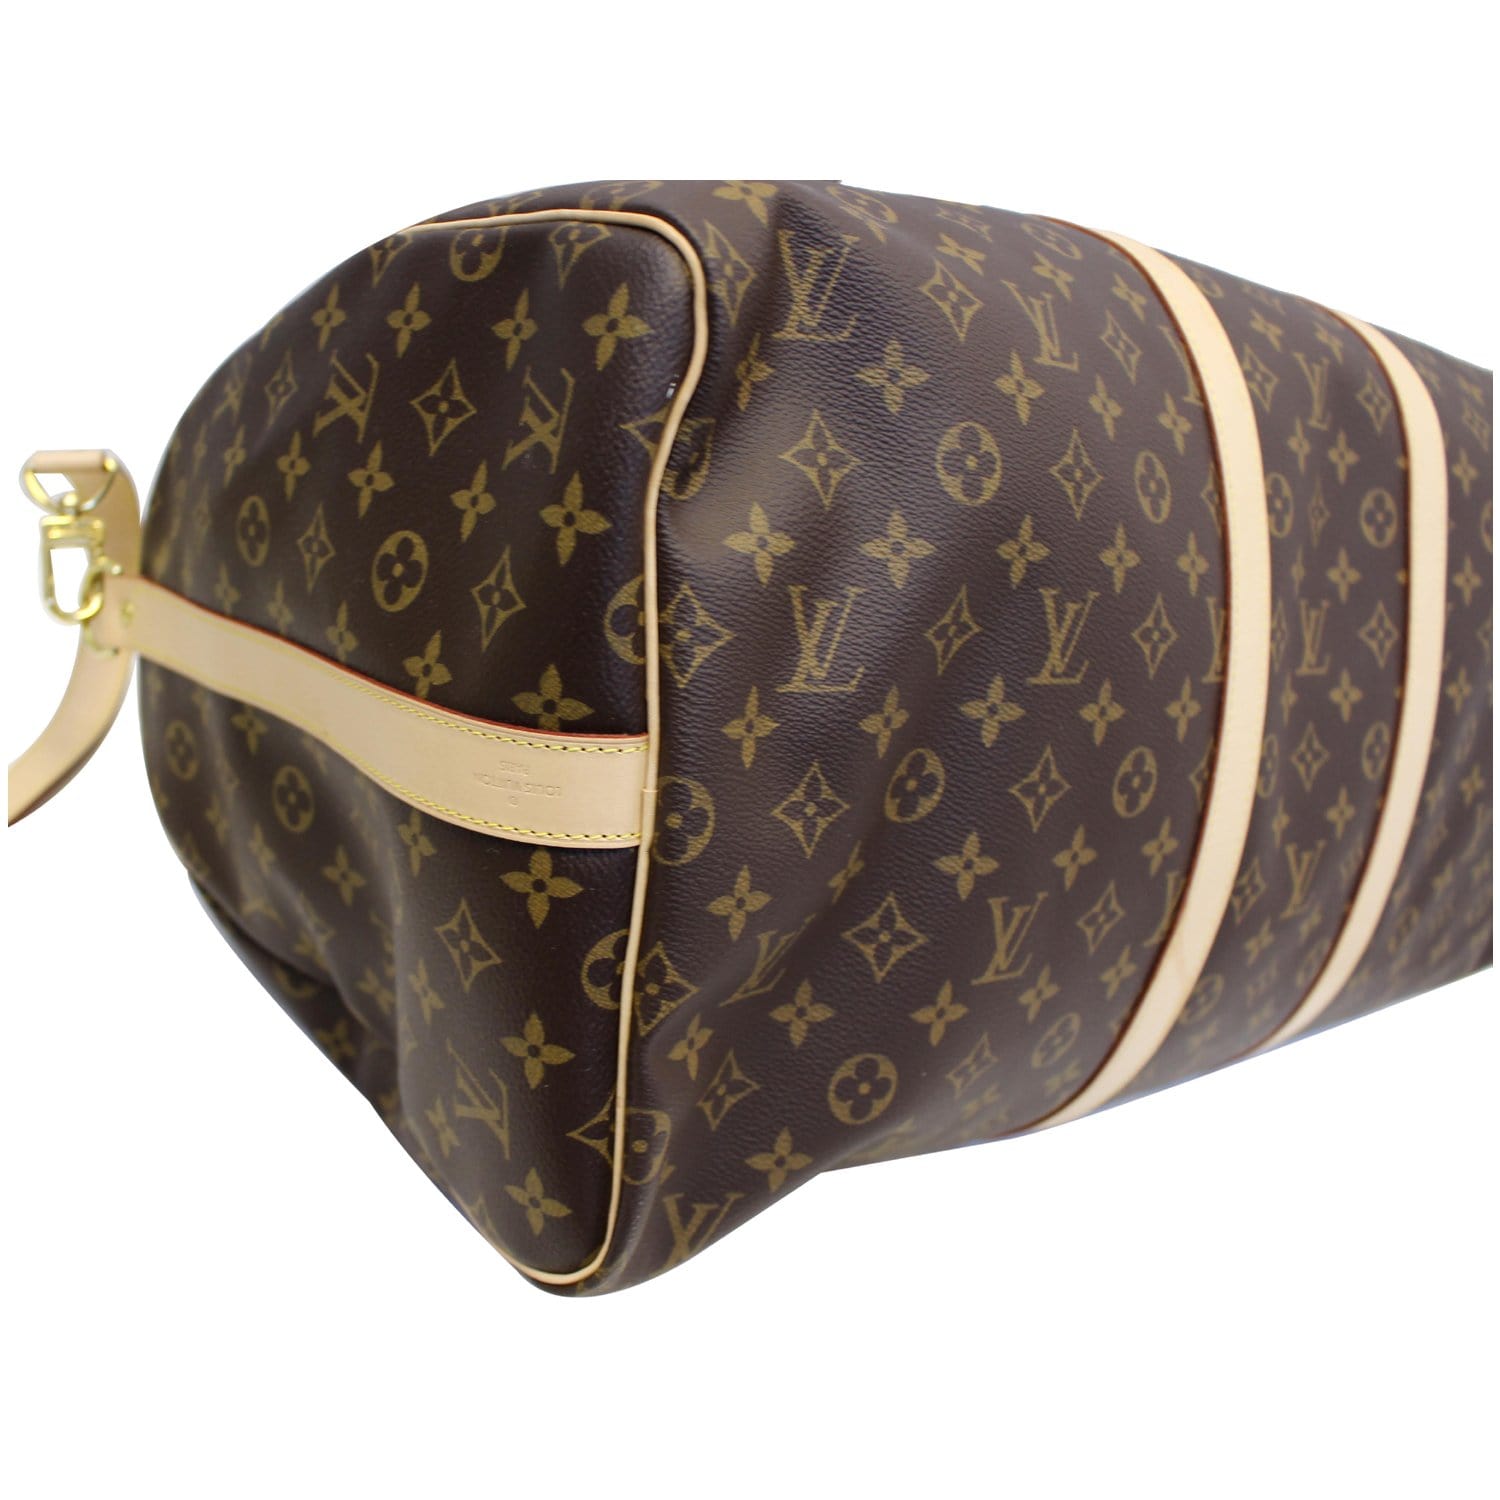 La Glam Consignment Boutique - LOUIS VUITTON Delightful PM and Bandouliere  25. EXCELLENT CONDITION! w/original receipts and dust bags.